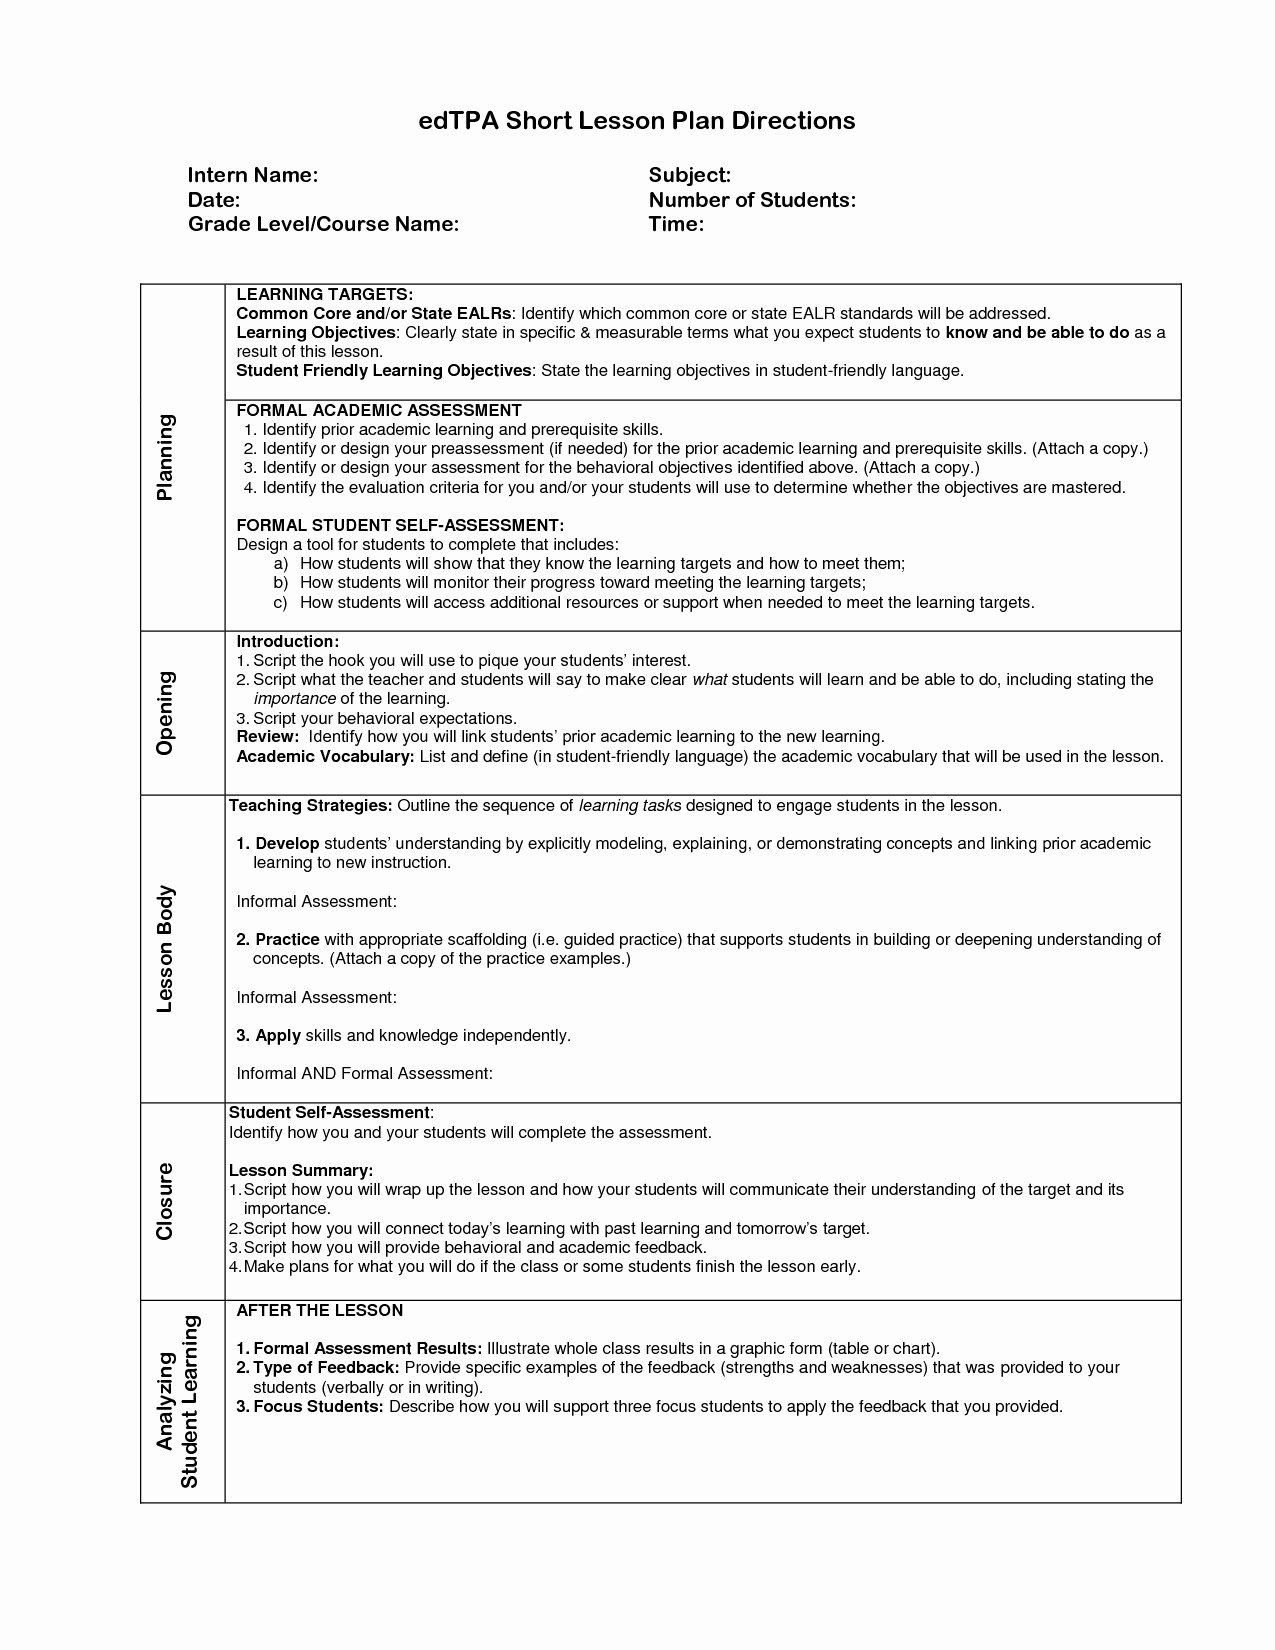 Special Education Lesson Plan Template Best Of Edtpa Special Education Lesson Plan Template Flowersheet